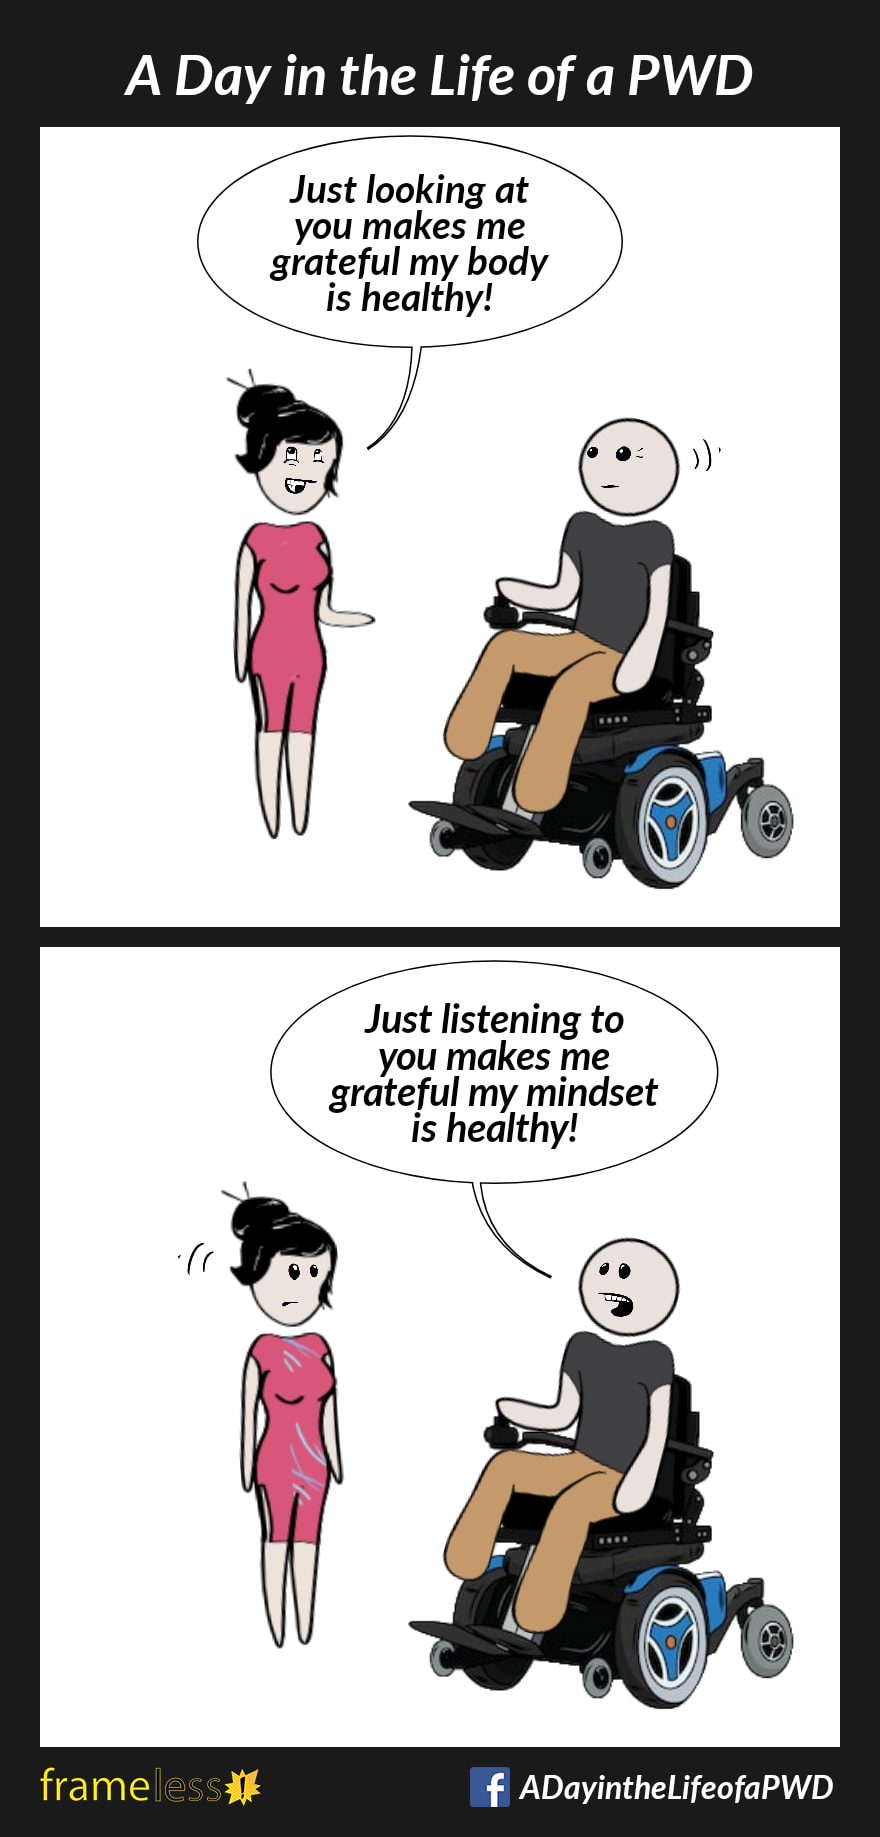 COMIC STRIP 
A Day in the Life of a PWD (Person With a Disability) 

Frame 1:
A man in a wheelchair is talking with a woman.
WOMAN: Just looking at you makes me grateful my body is healthy!

Frame 2:
MAN: Just listening to you makes me grateful my mindset is healthy!